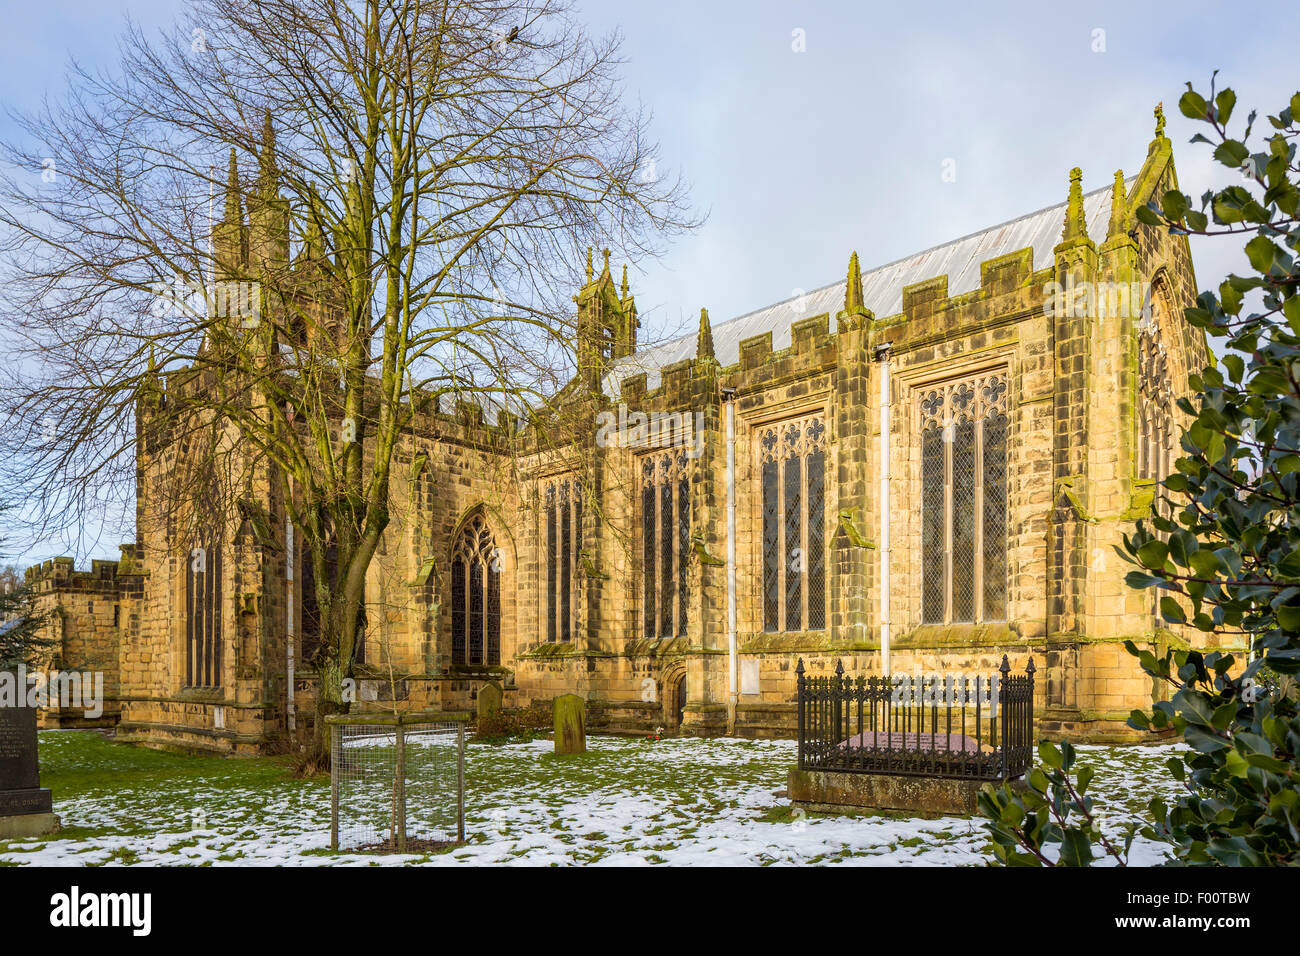 Cathedral of the Peak, Tideswell, Peak District National Park, Derbyshire, England, United Kingdom, Europe. Stock Photo